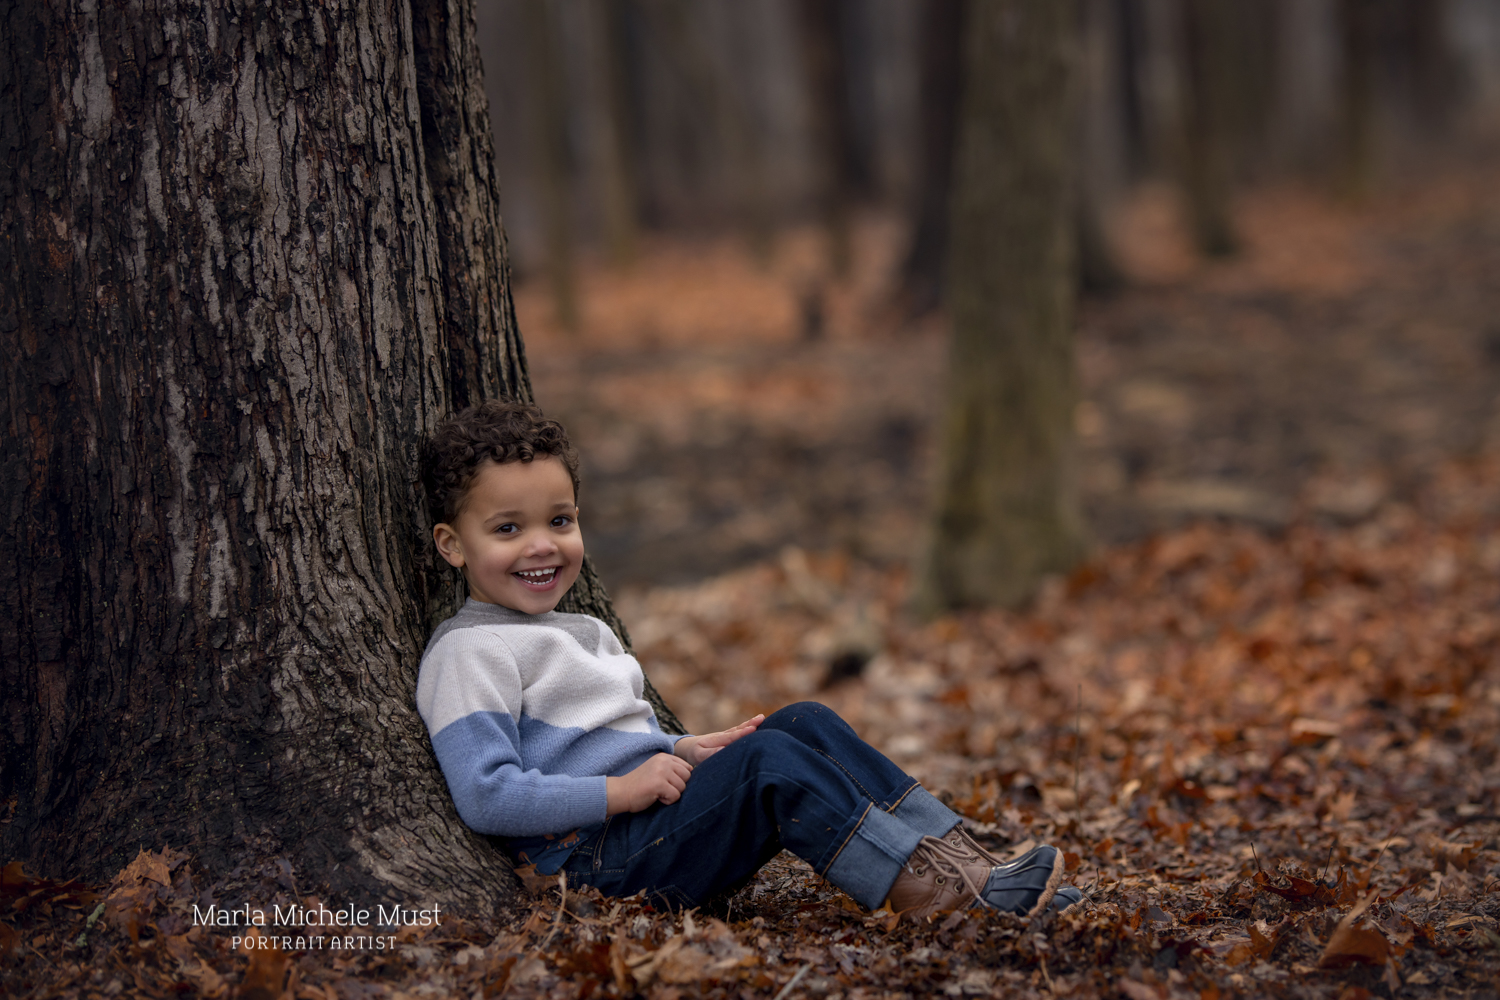 A child is sitting and leaning back against a tree, and smiling to the camera as many autumn leaves surround the forest floor around him near Detroit.